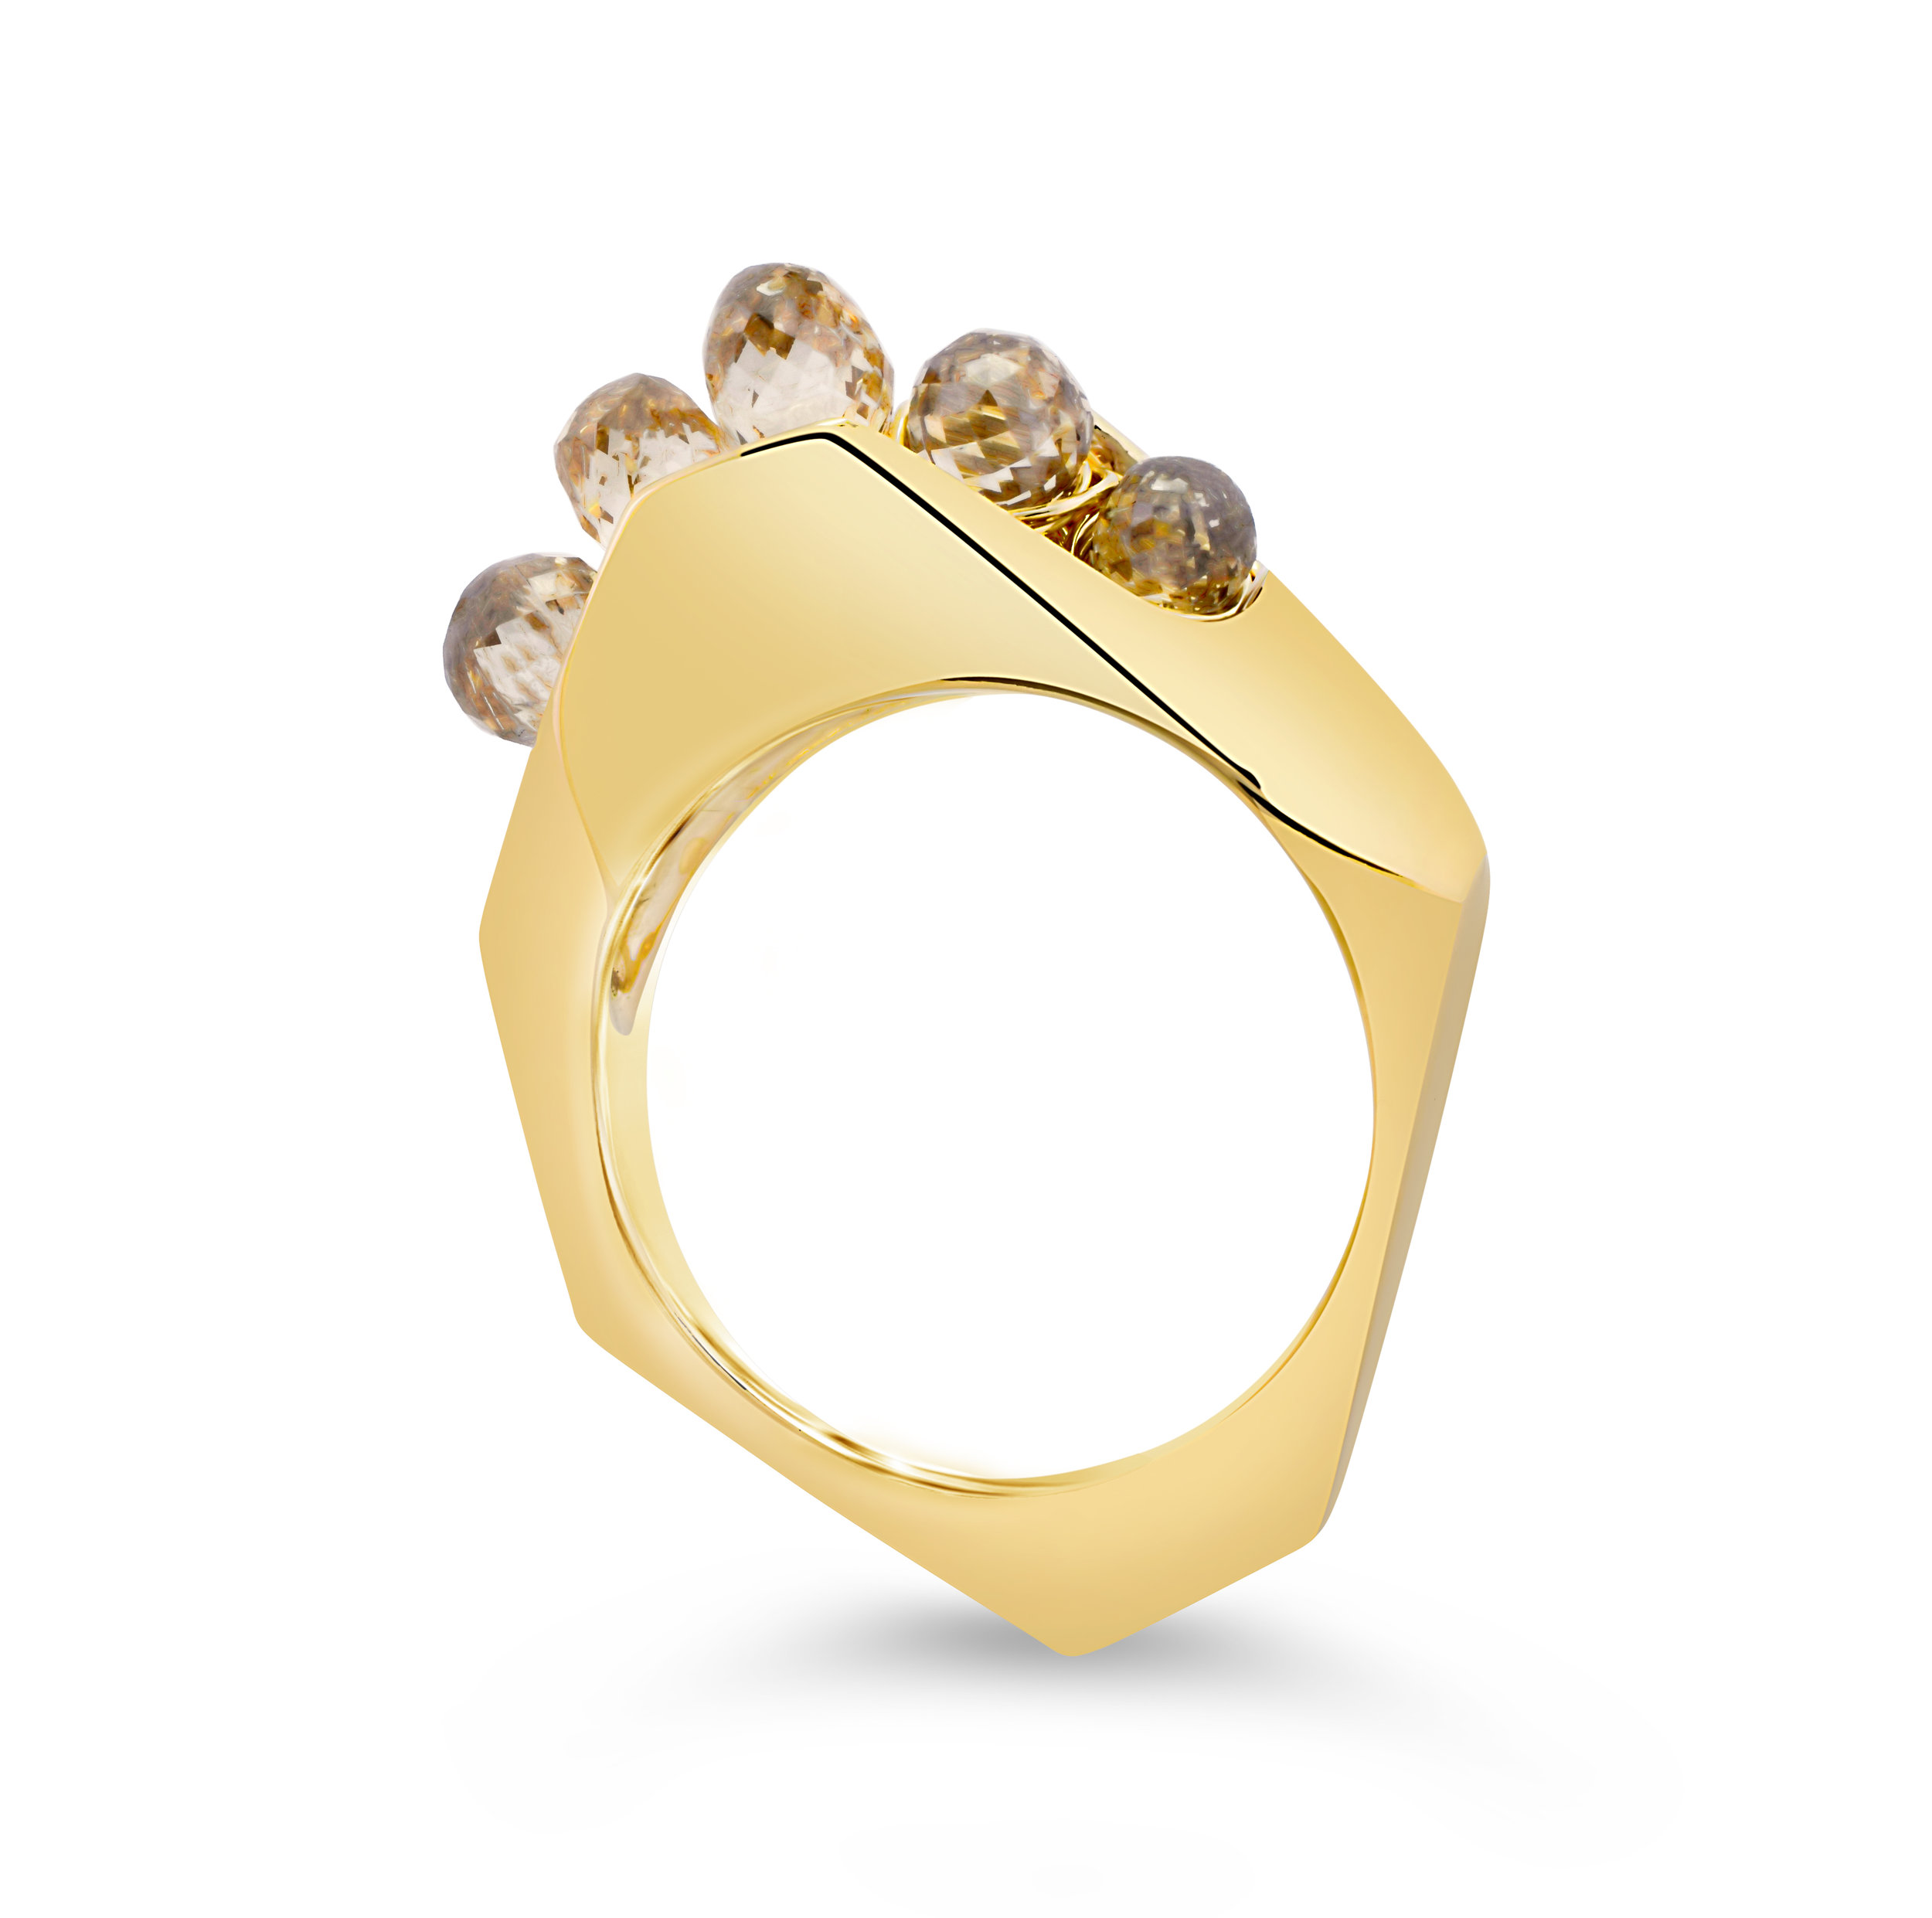 14k gold casted ring with 4 carats of champagne diamonds